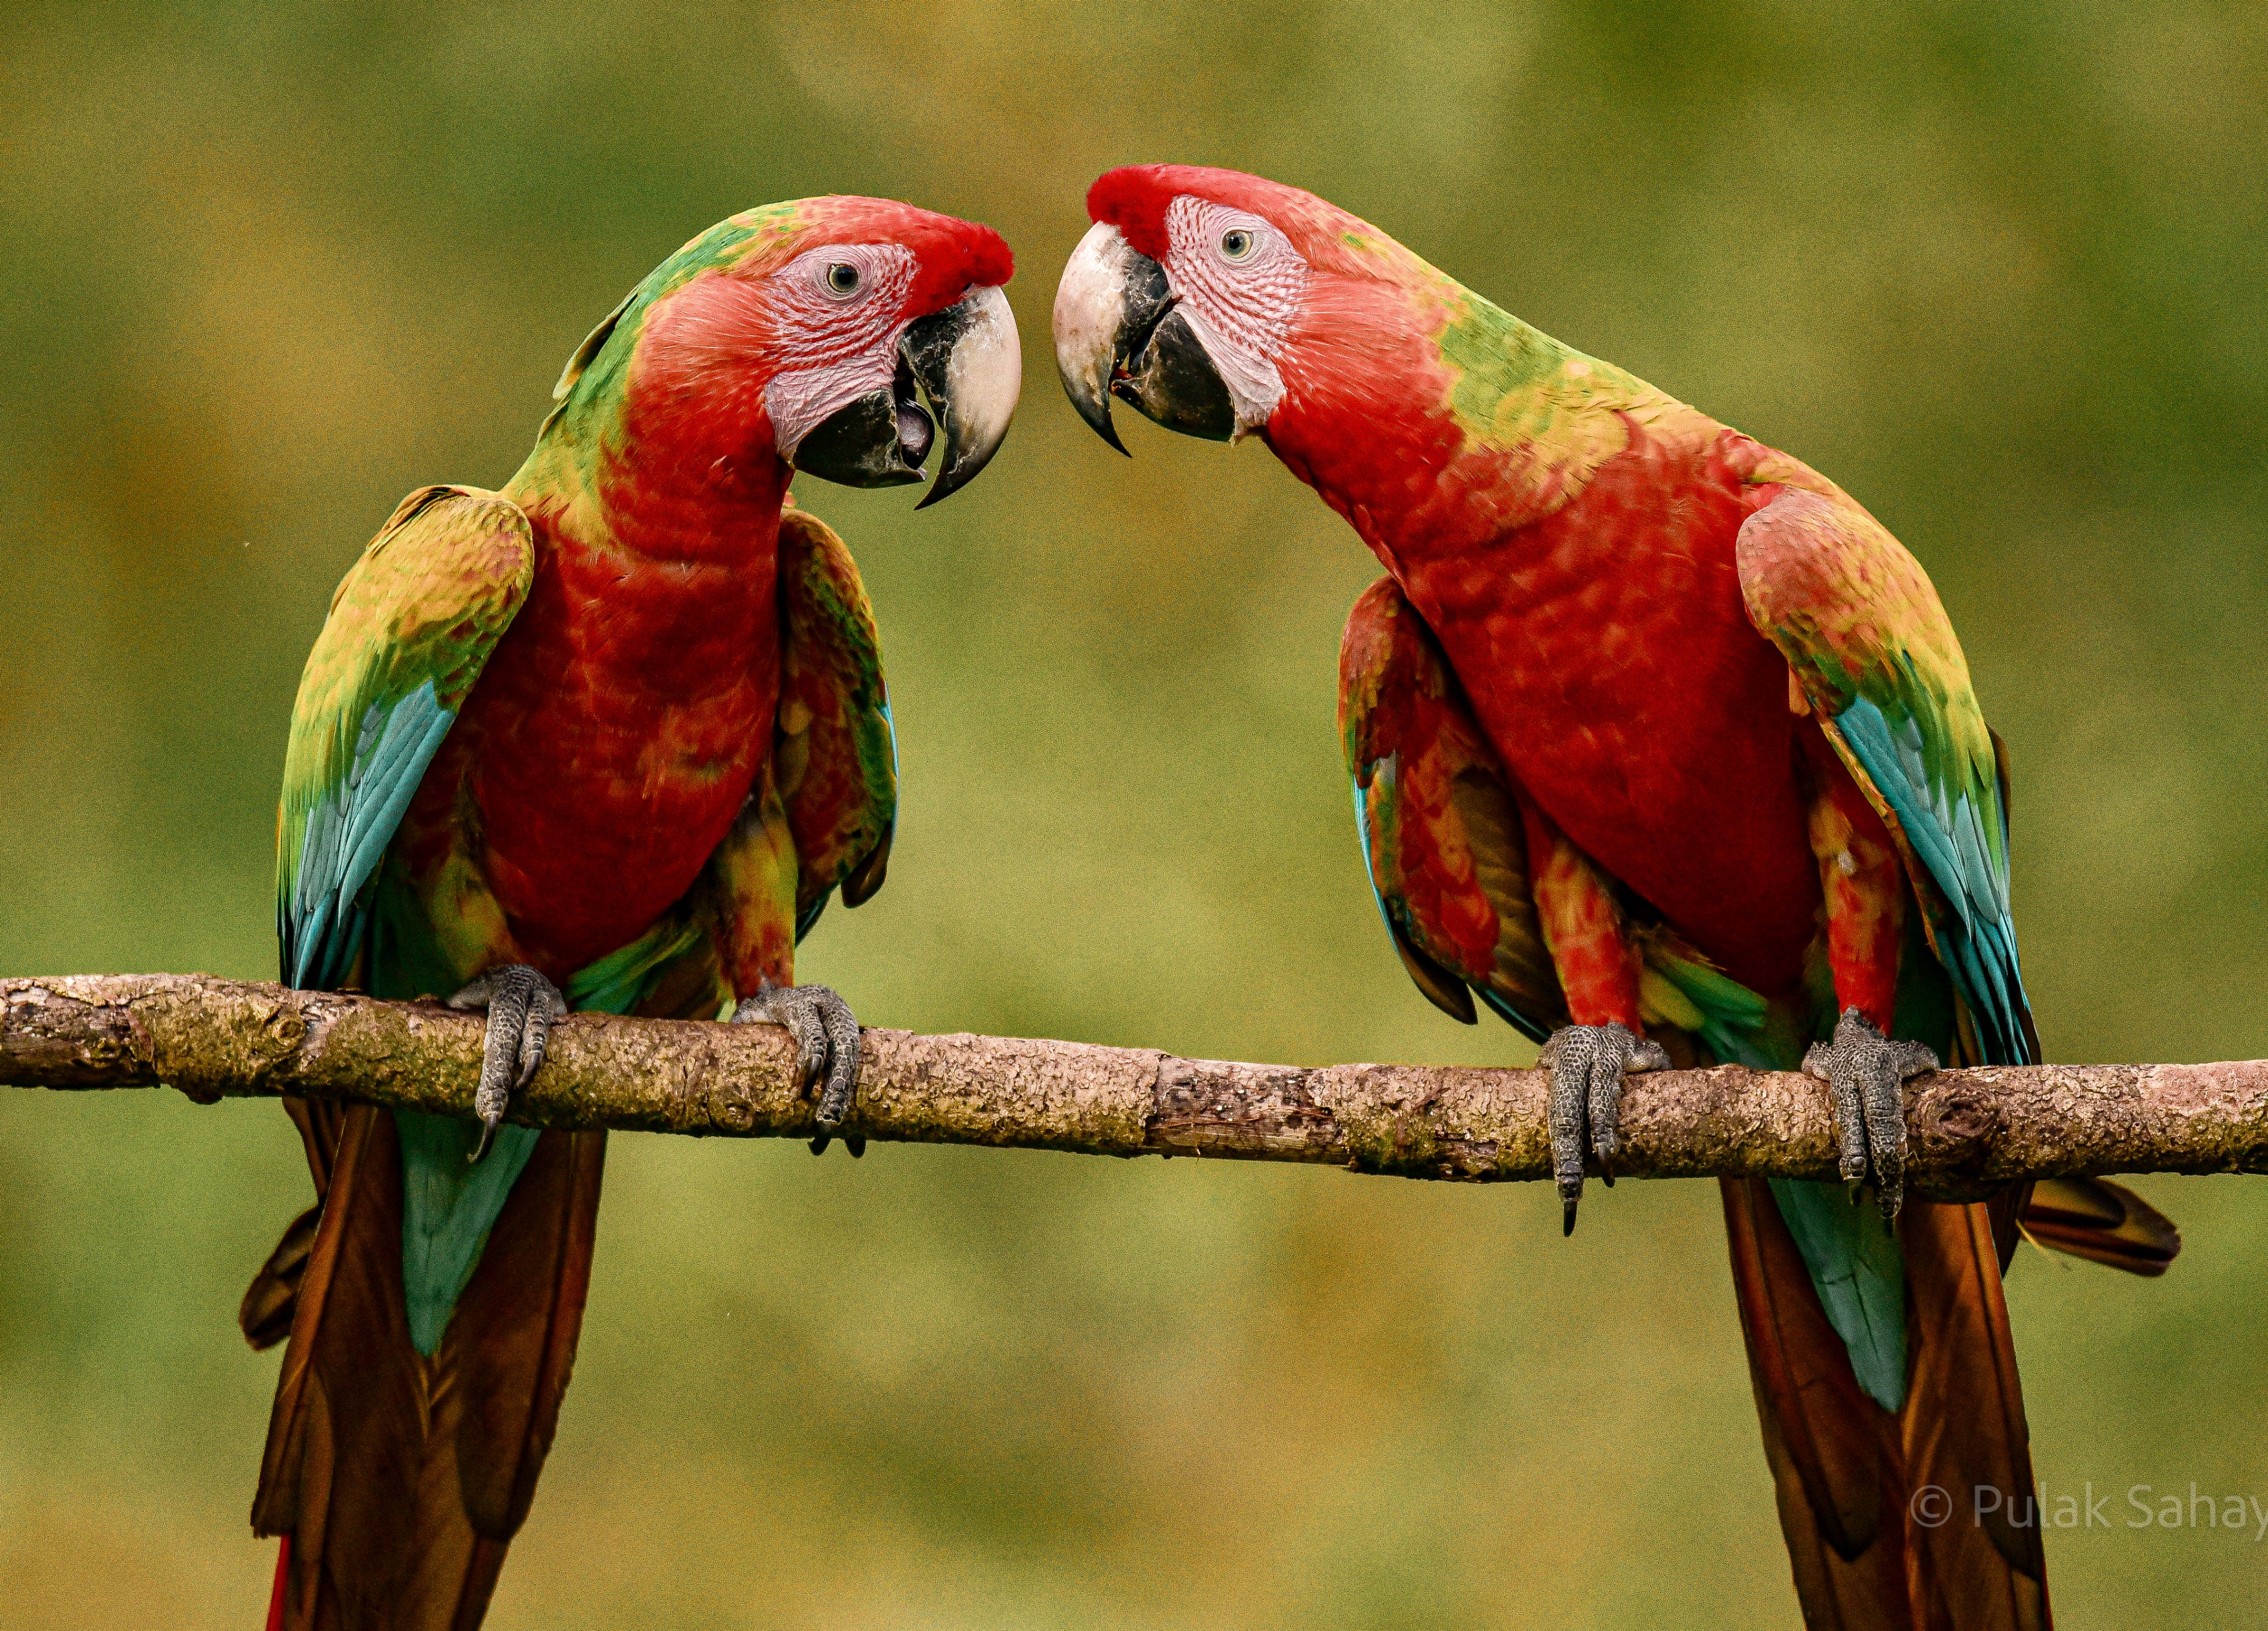 Two Macaws interacting